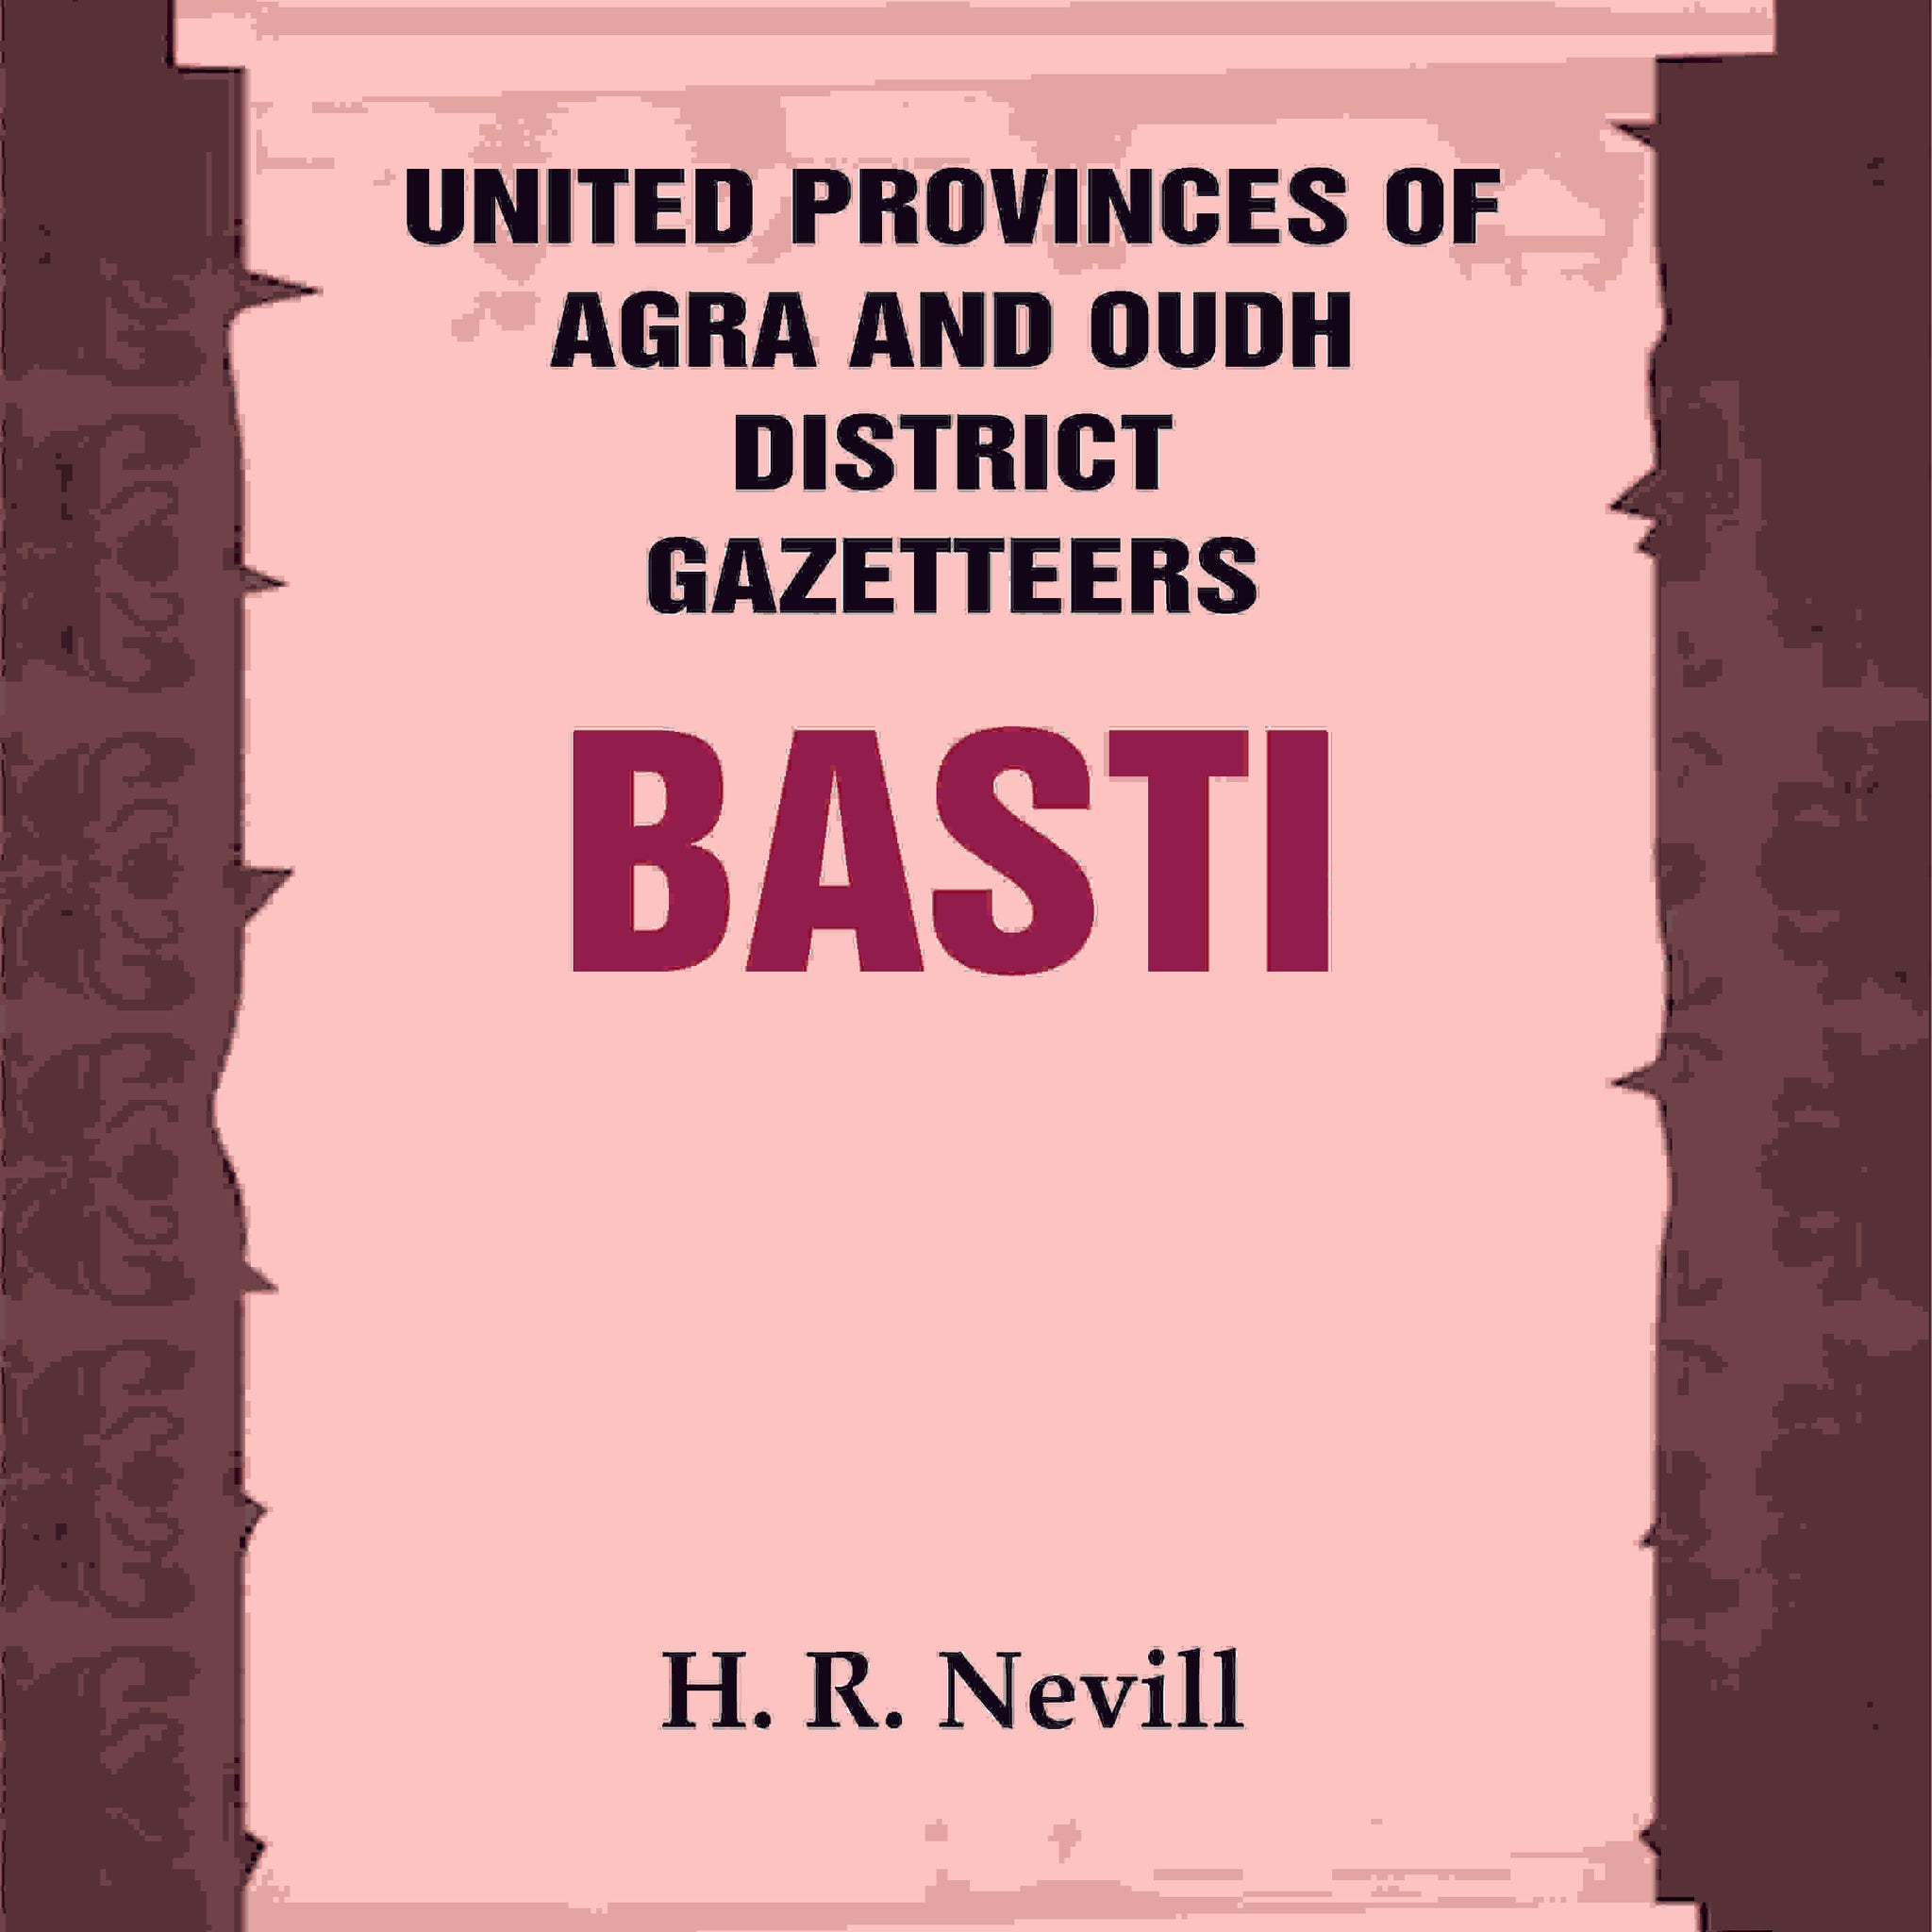 United Provinces of Agra and Oudh District Gazetteers: Basti